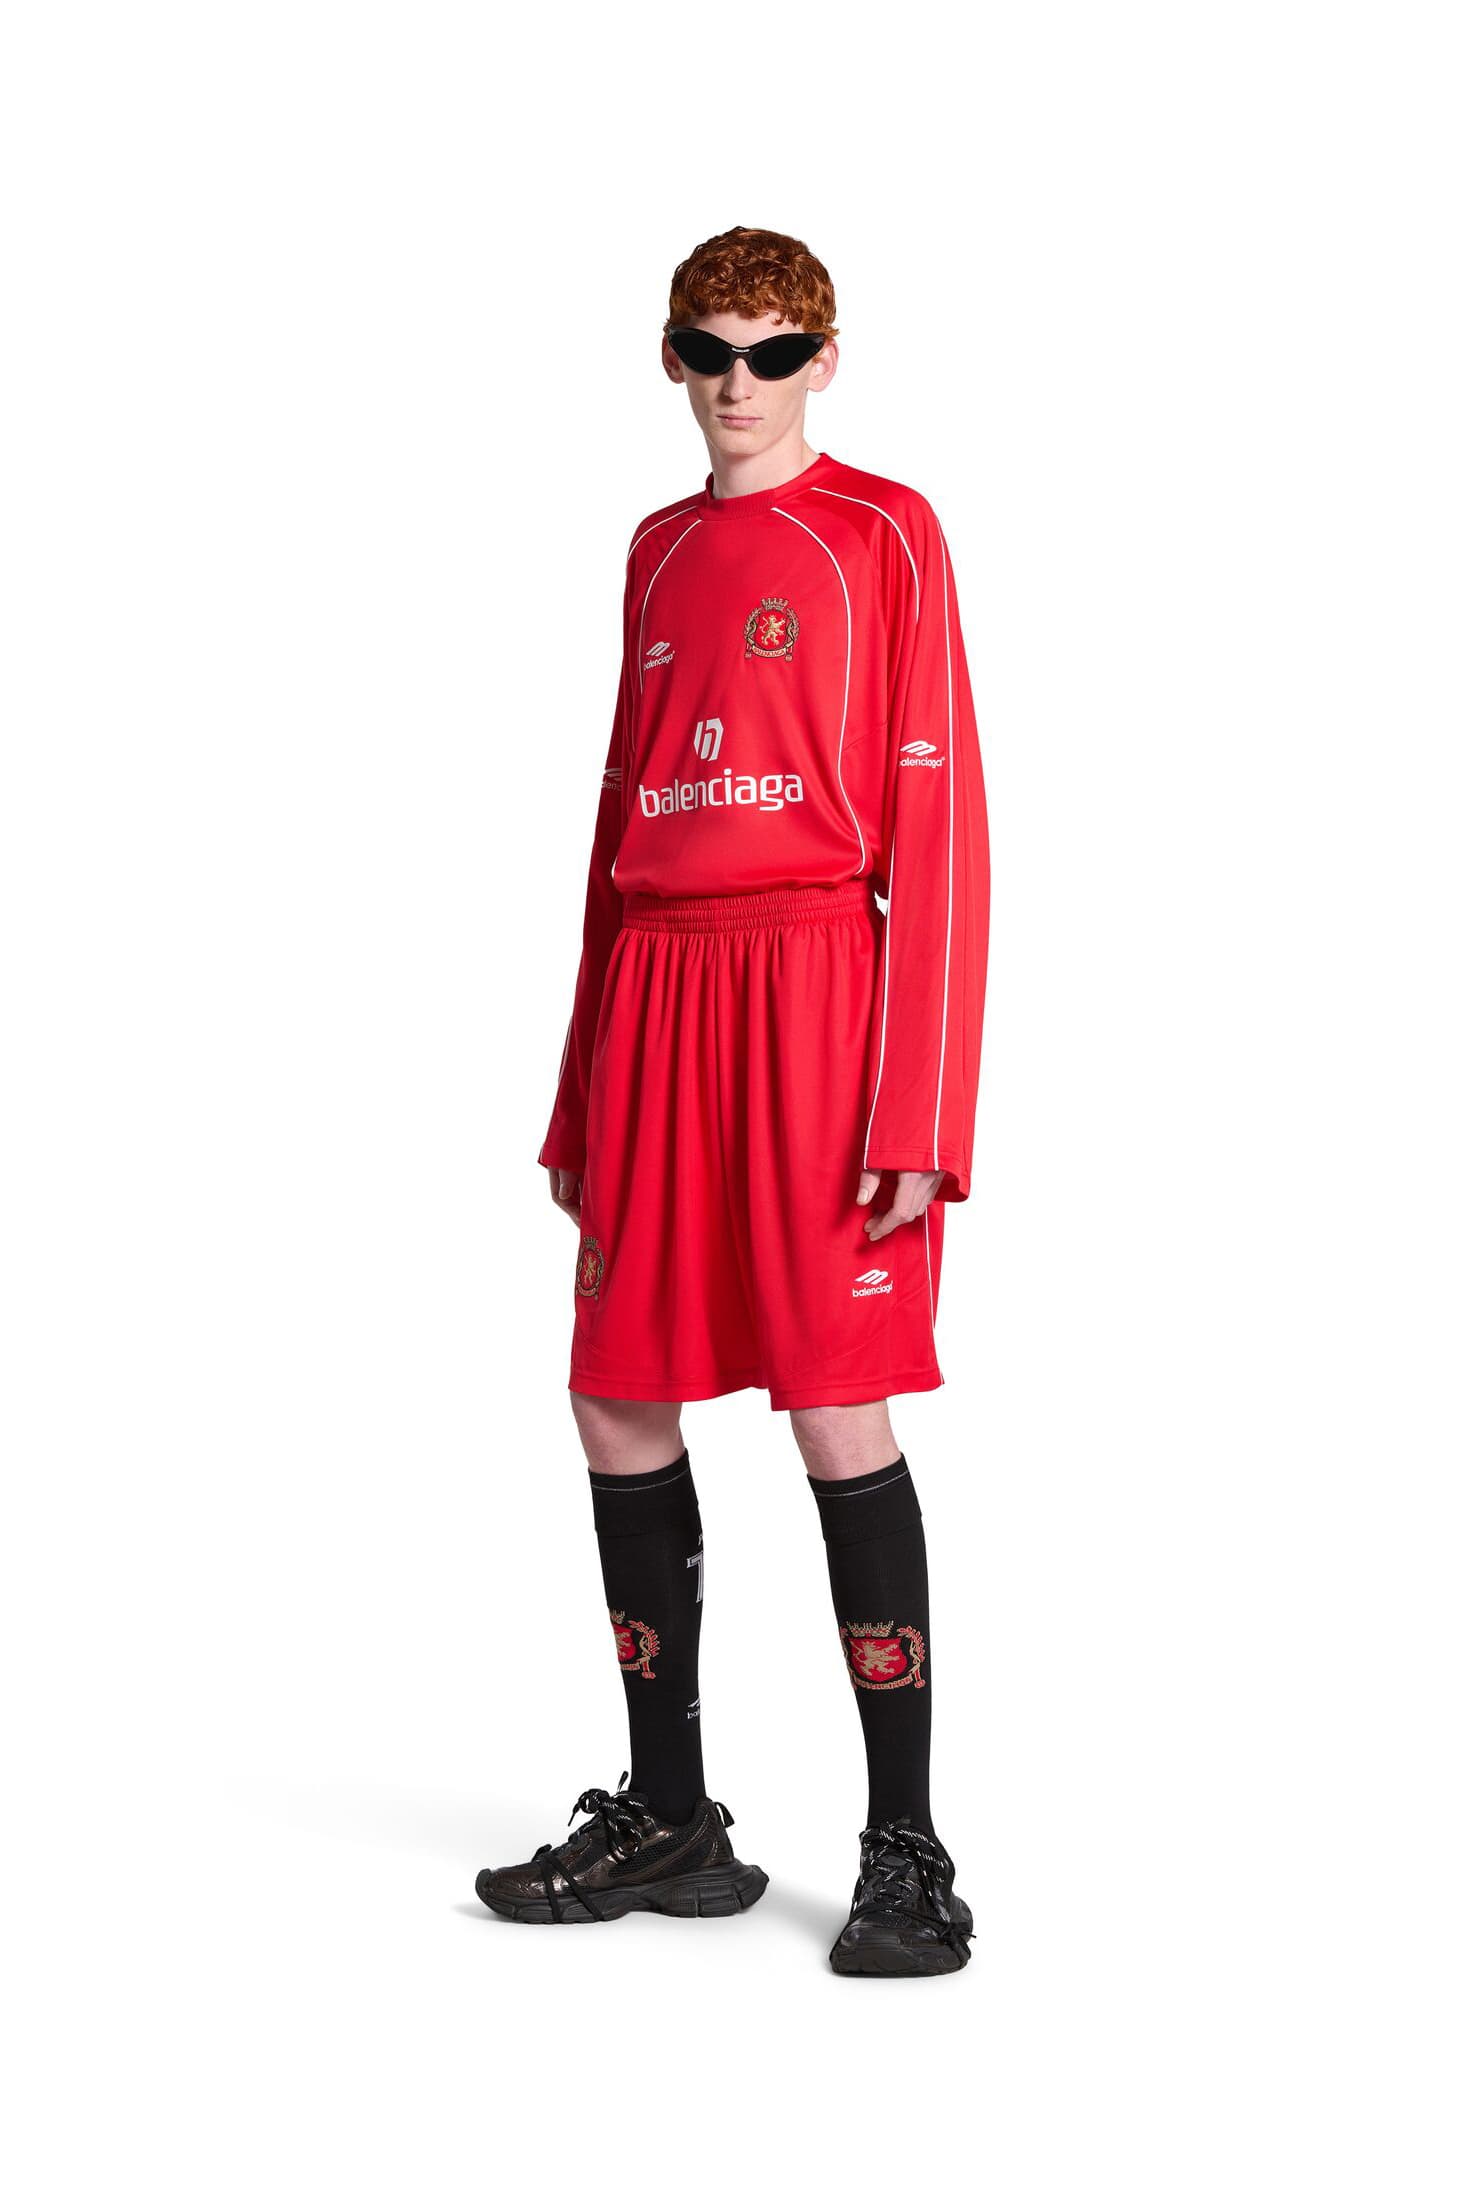 Balenciaga Unveils Limited-Edition Soccer Collection | The Impression